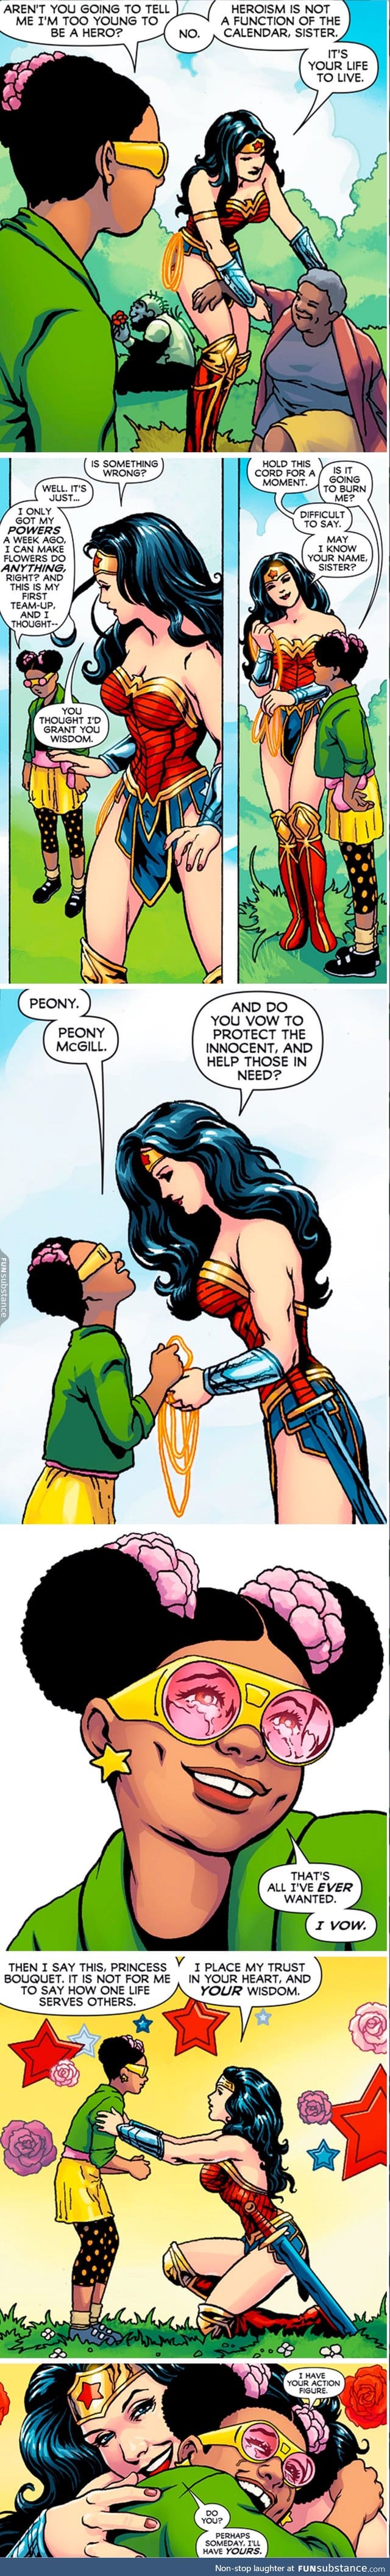 This is why I love Wonder Woman